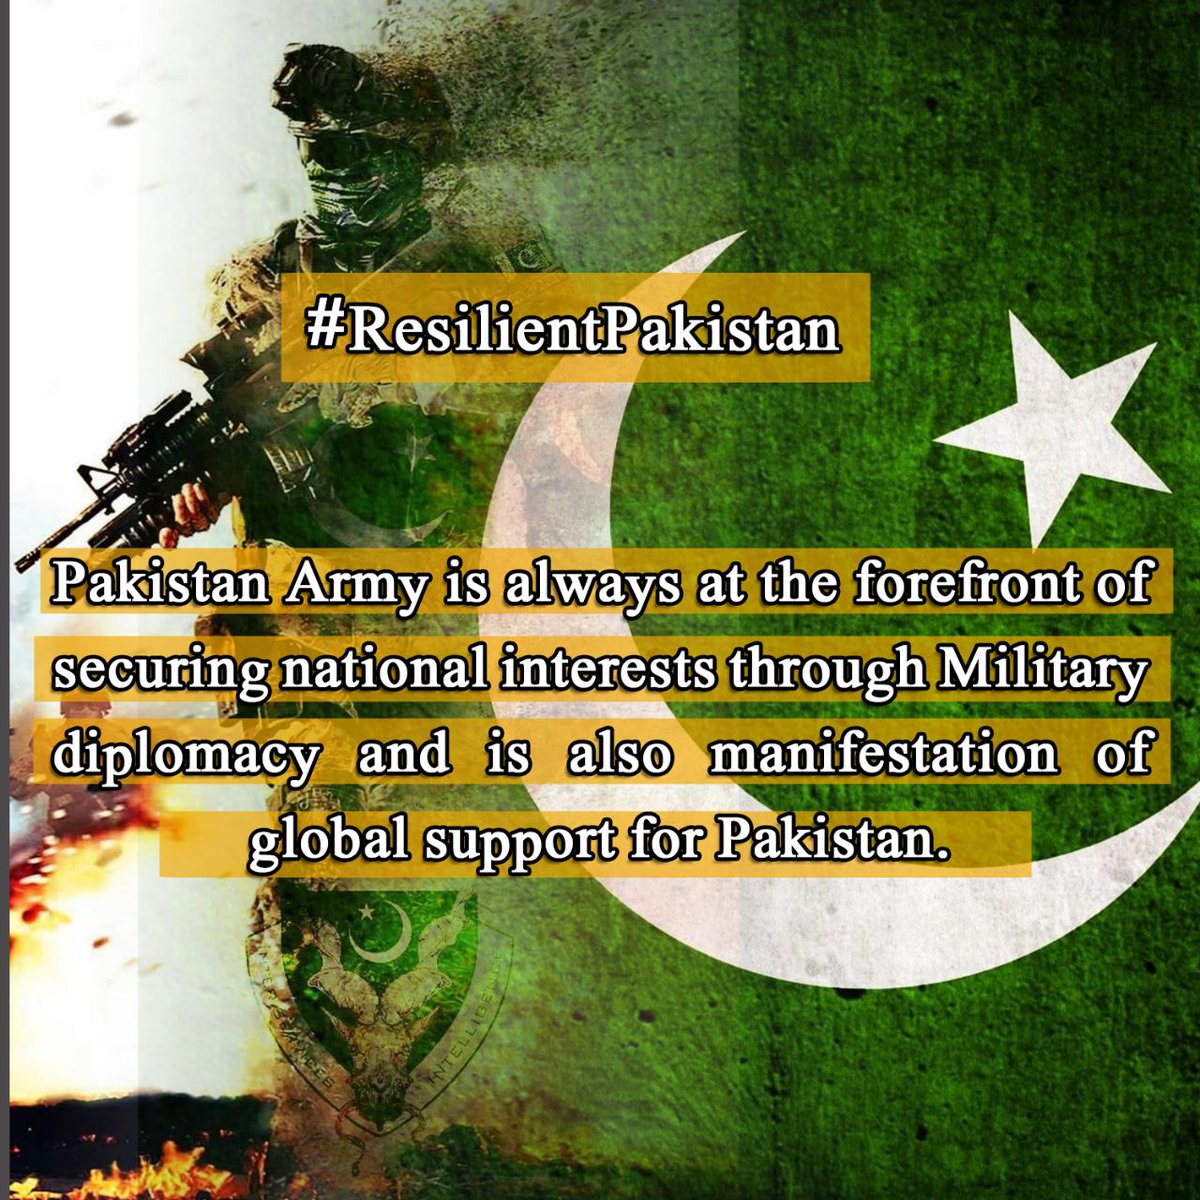 Pakistani natios is proud of its army.
#ResilientPakistan